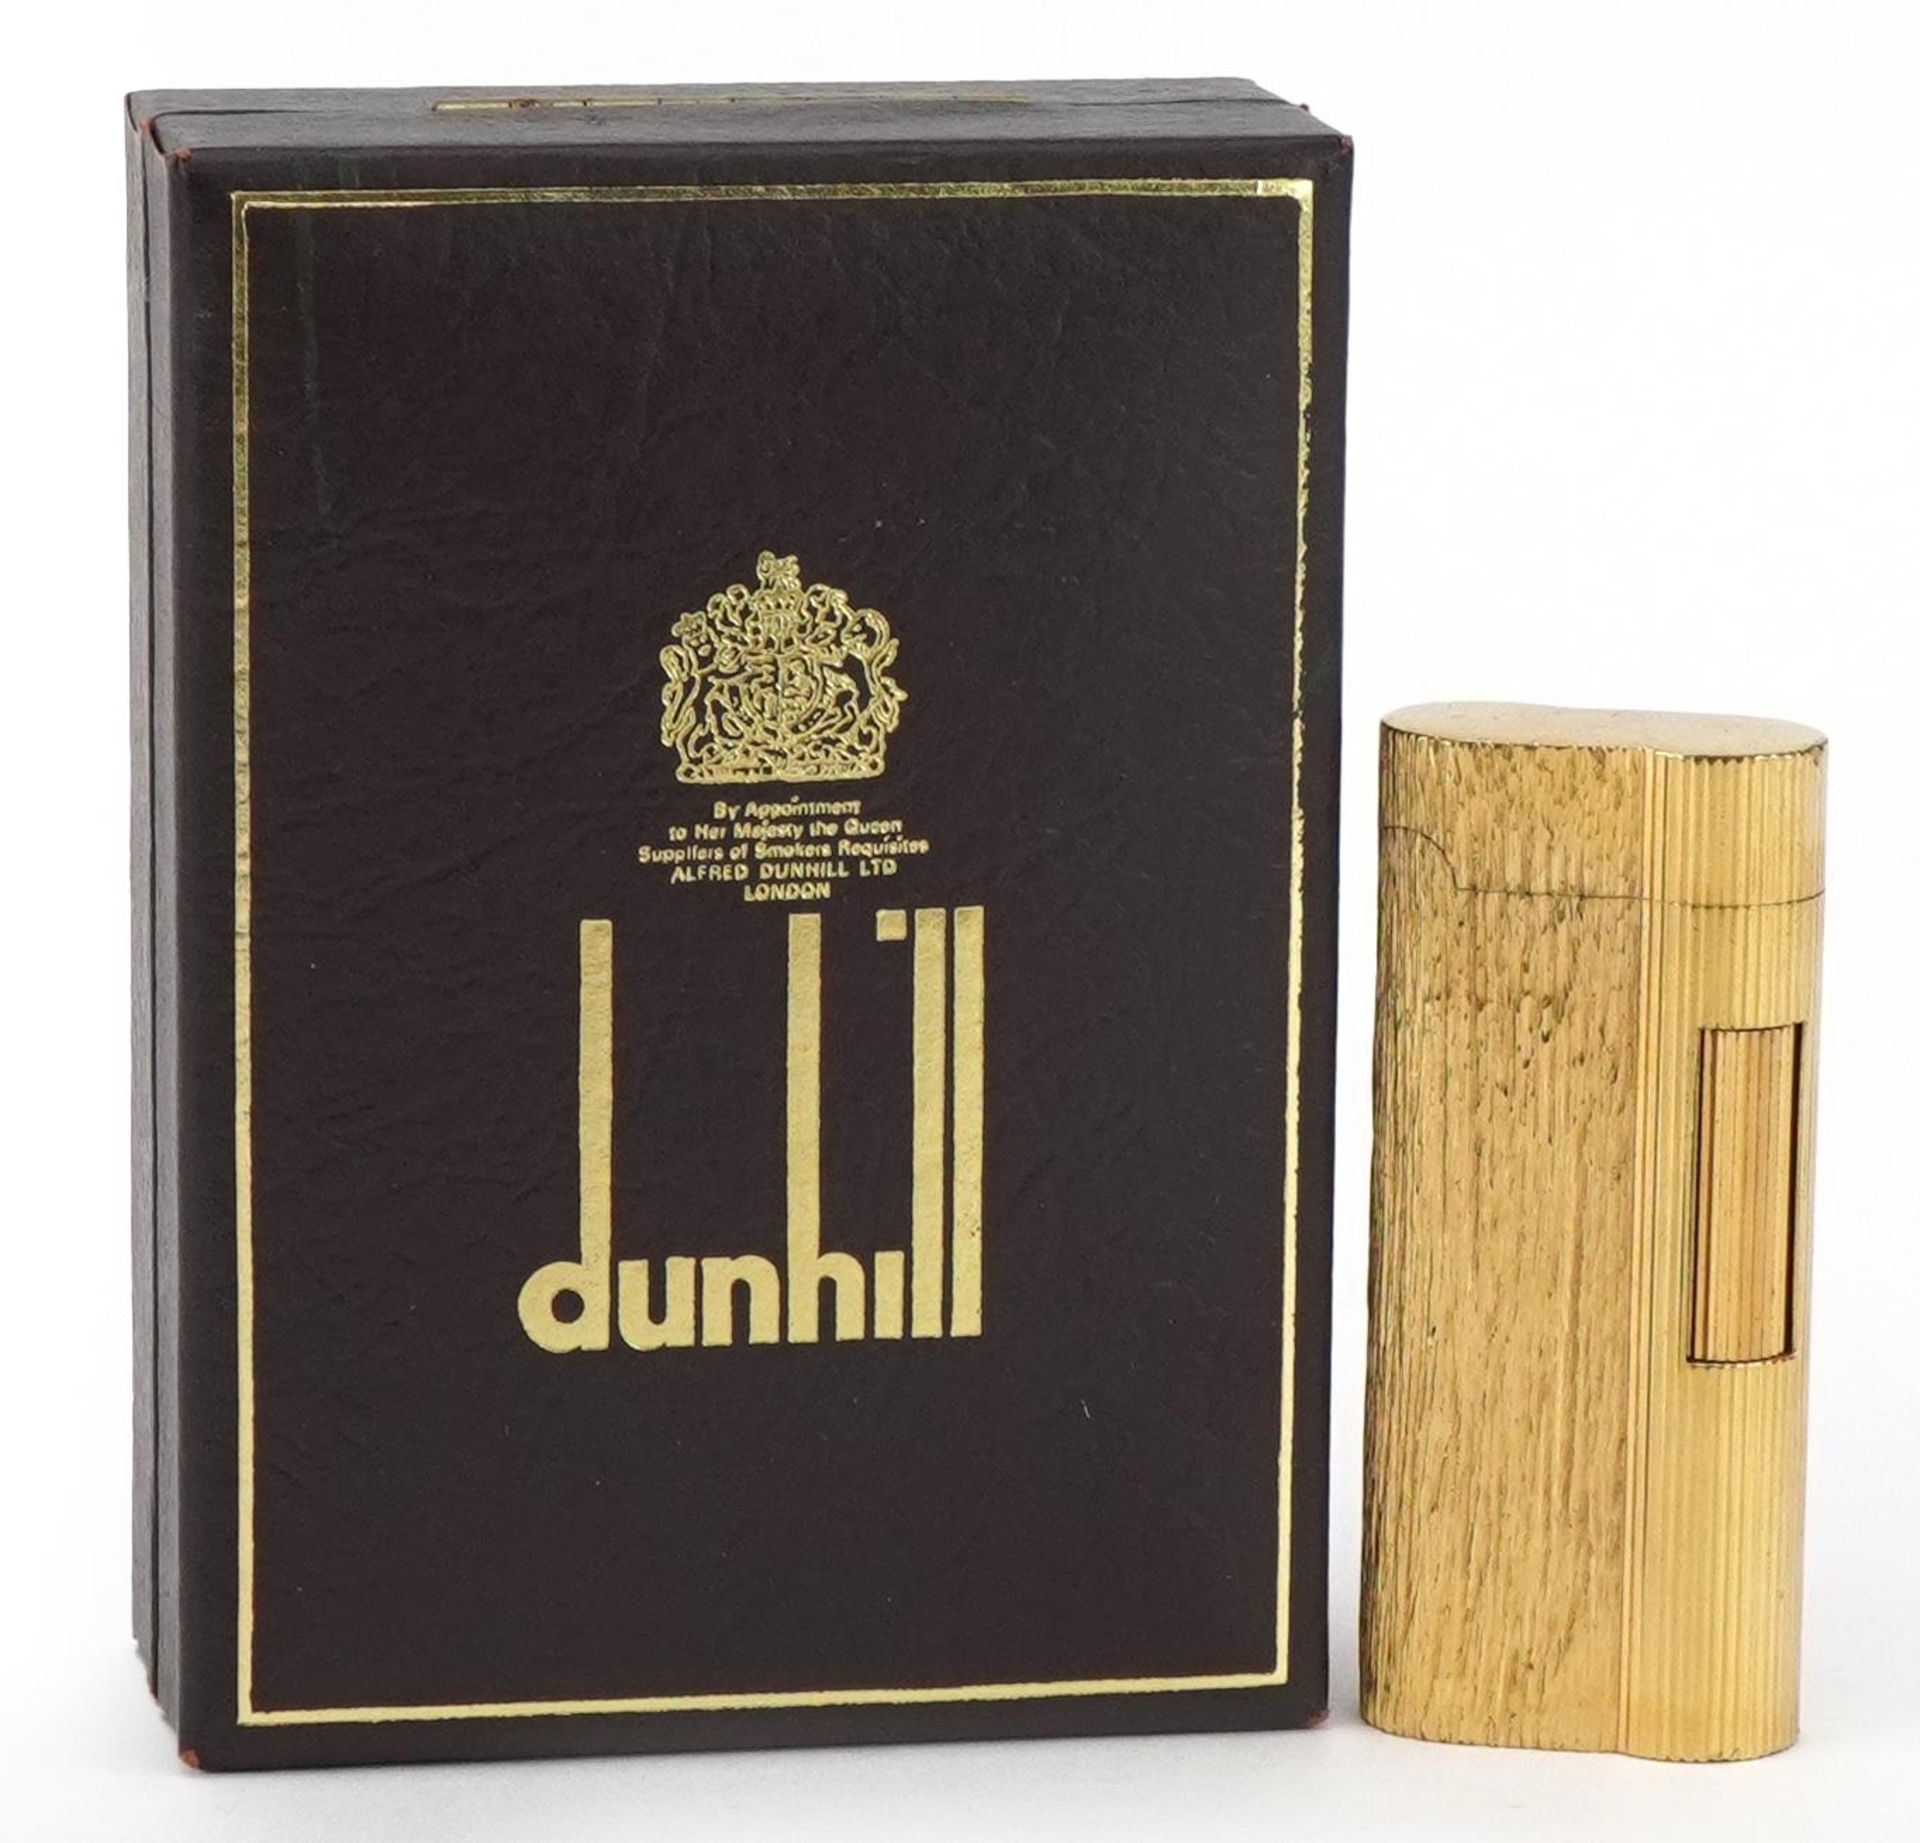 Dunhill gold plated bark design pocket lighter with box : For further information on this lot please